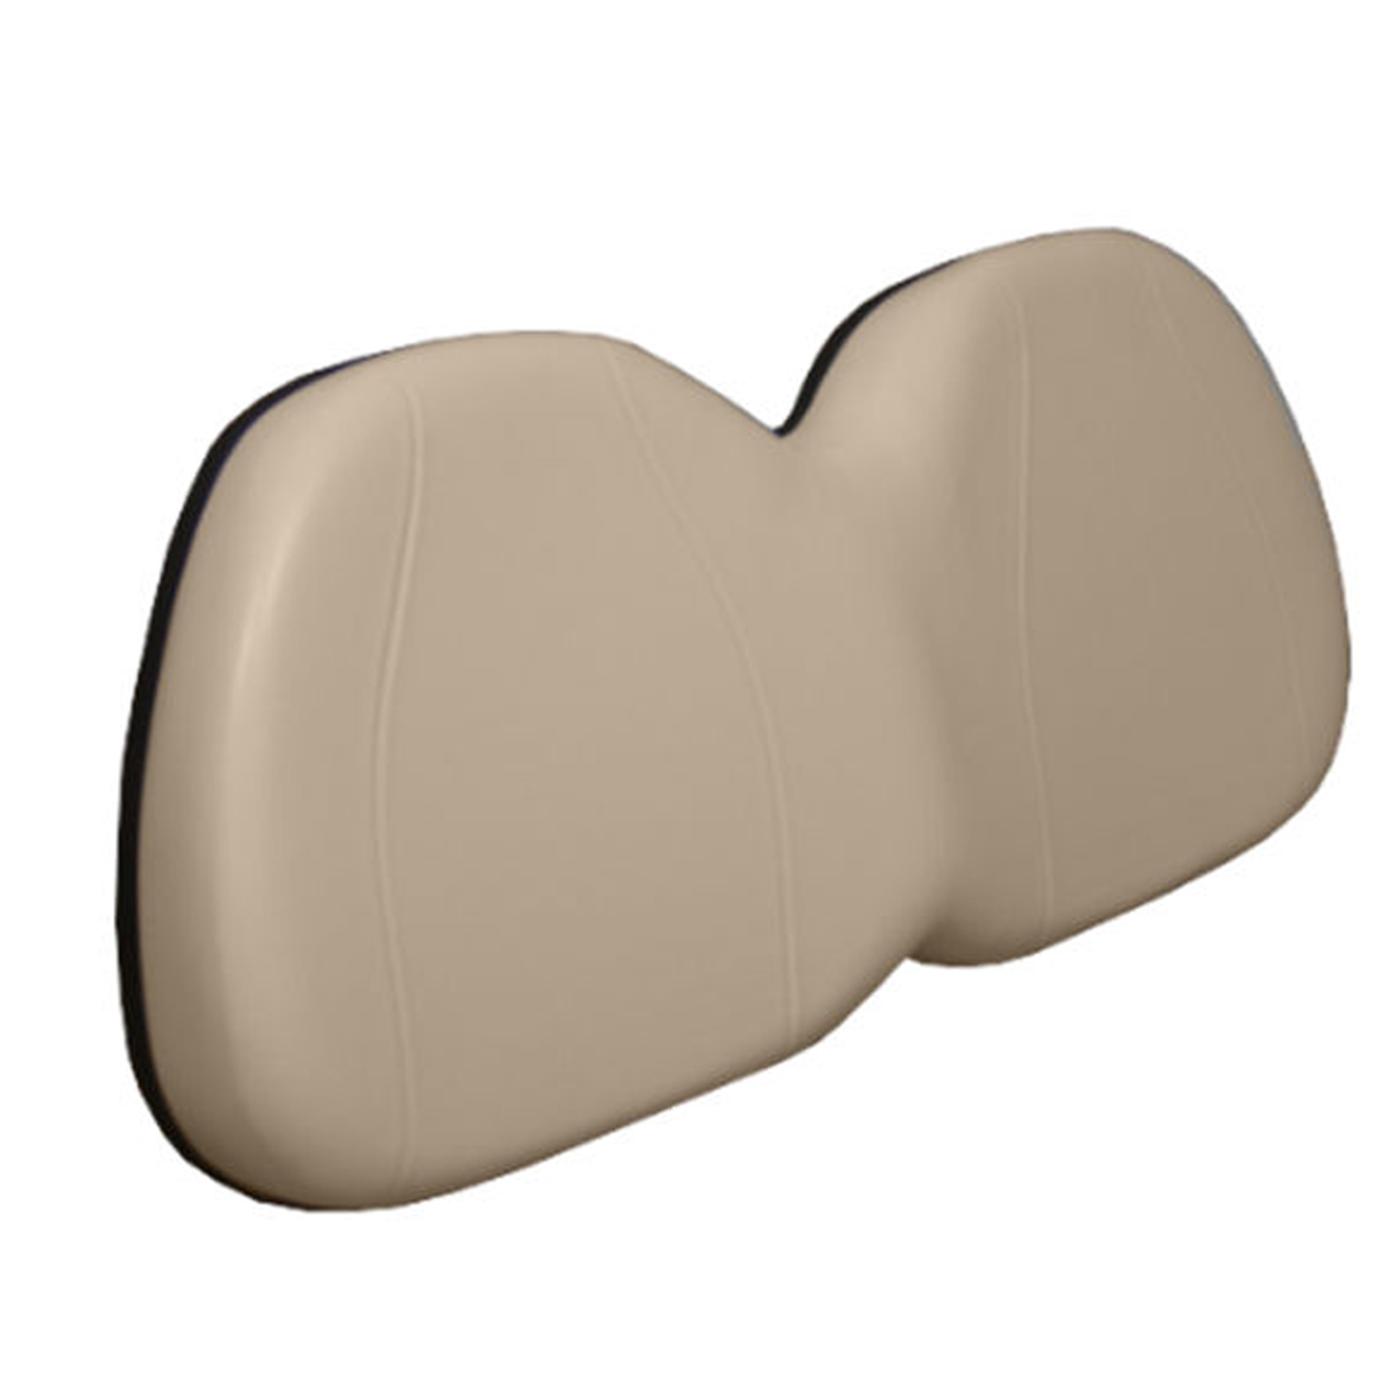 Club Car Precedent Beige Seat Backrest Cushion Assembly (Years 2004-Up)